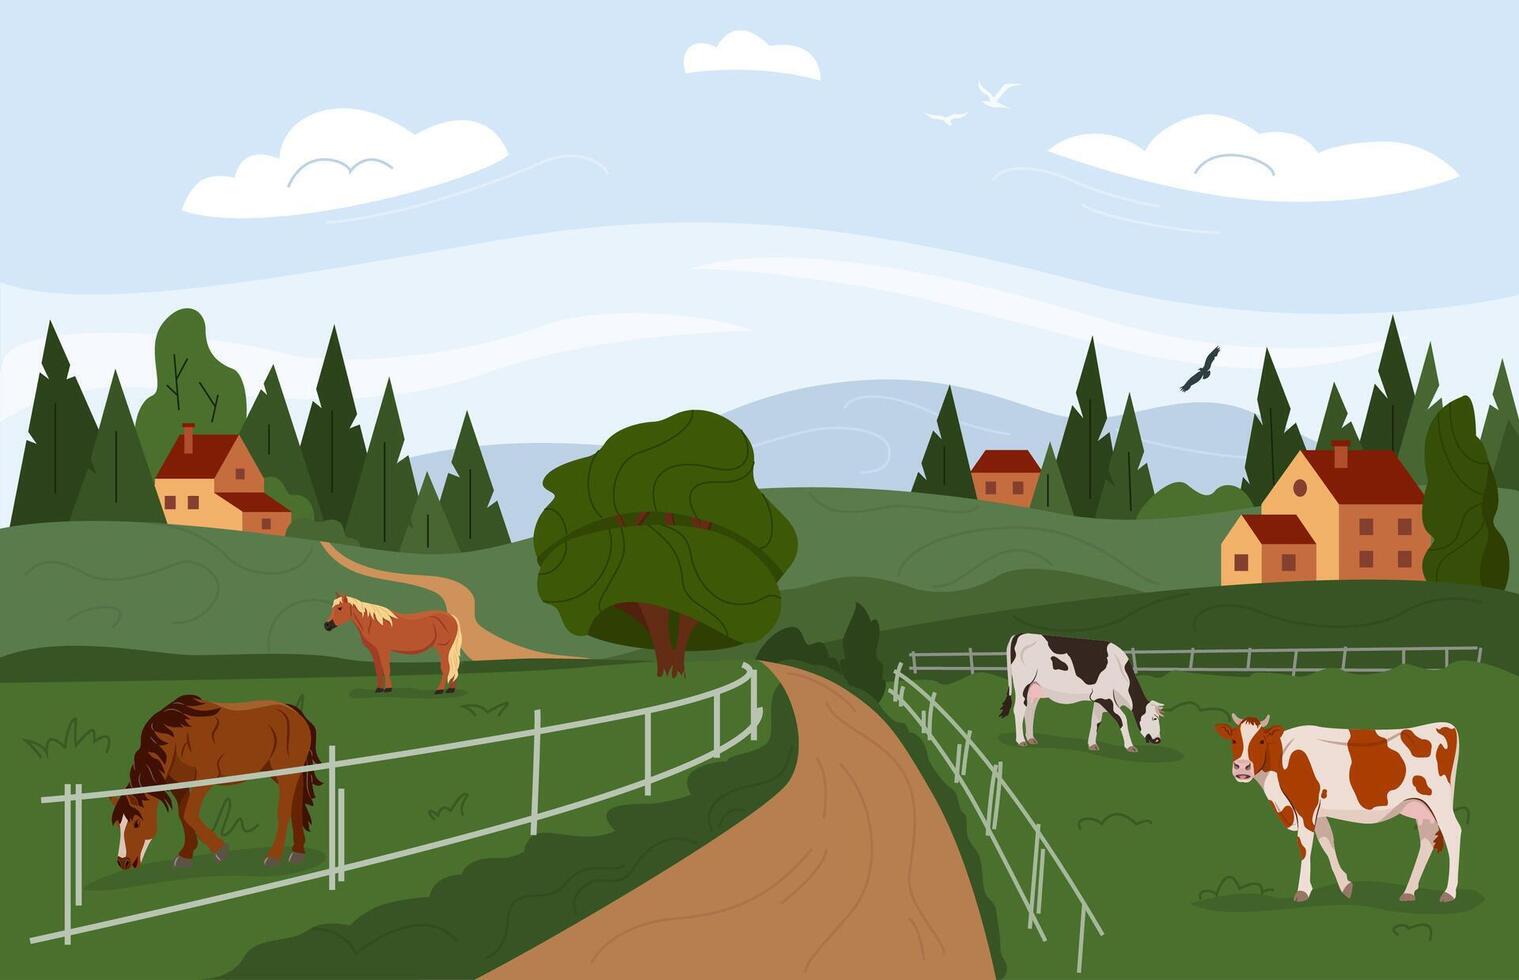 Rural summer landscape. Countryside with hills and village, cows and horses. Farm fieldwith animals. Vector illustration.